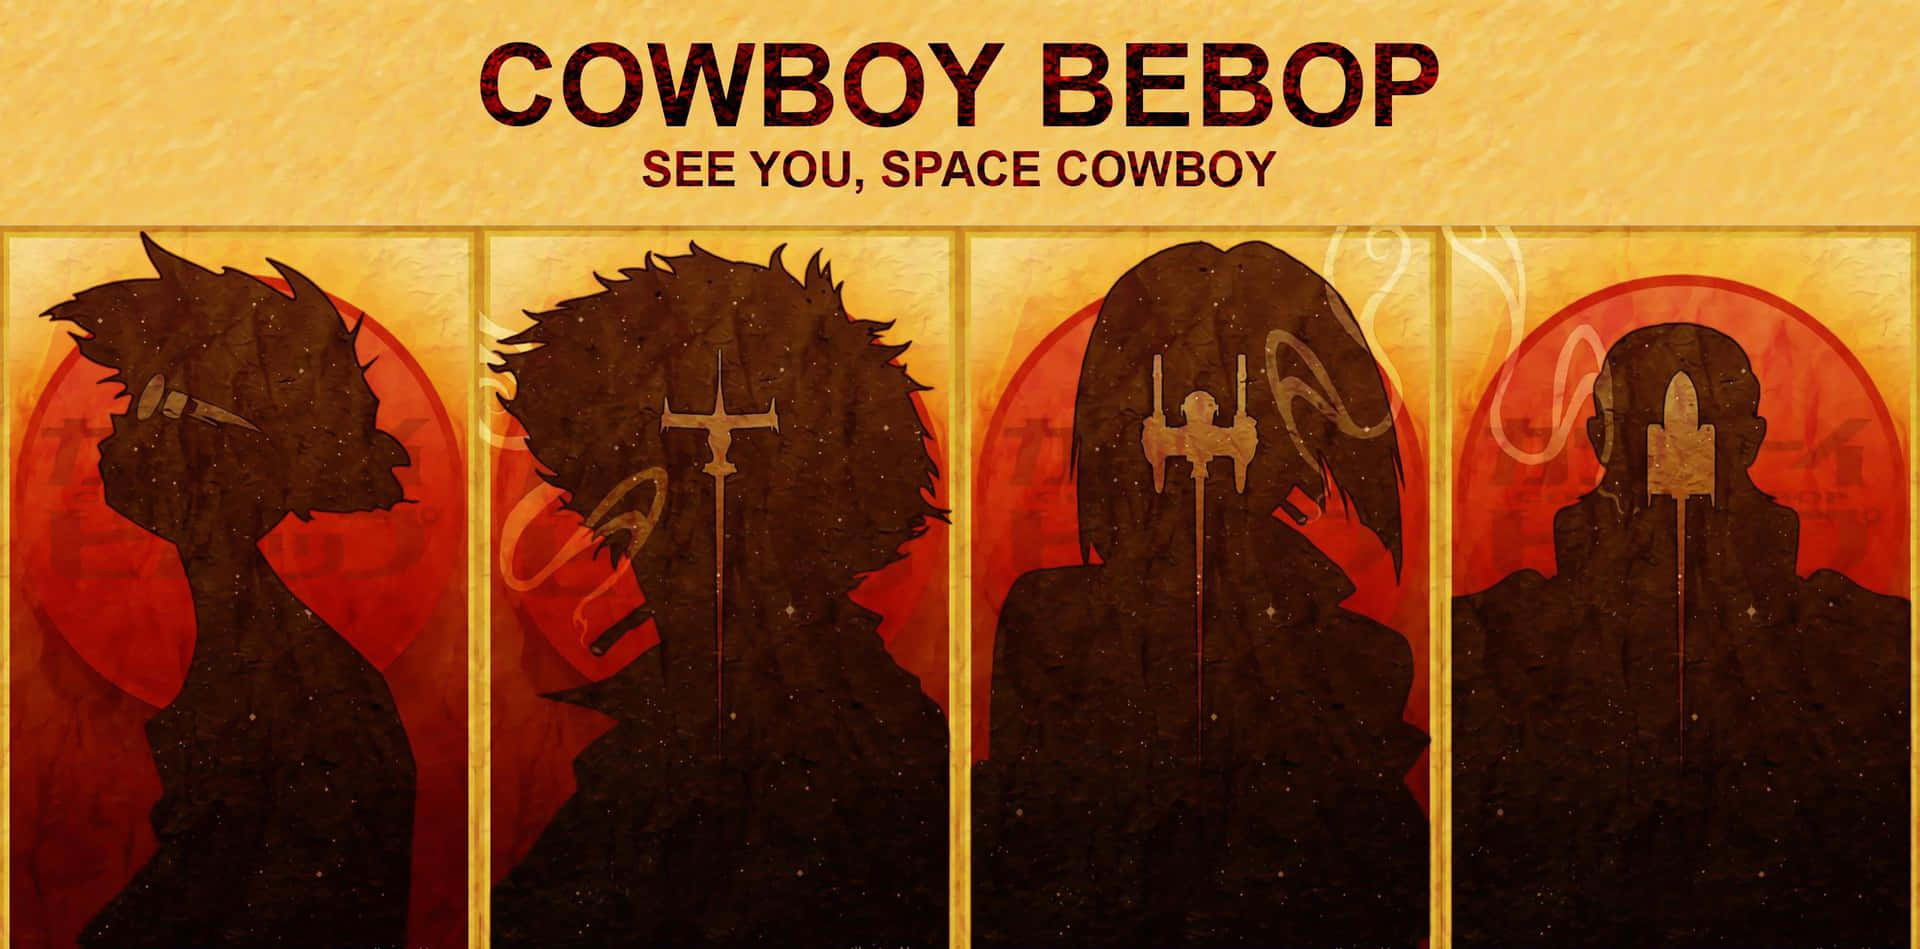 Explore the depths of outer space with the bounty hunting crew of the Bebop